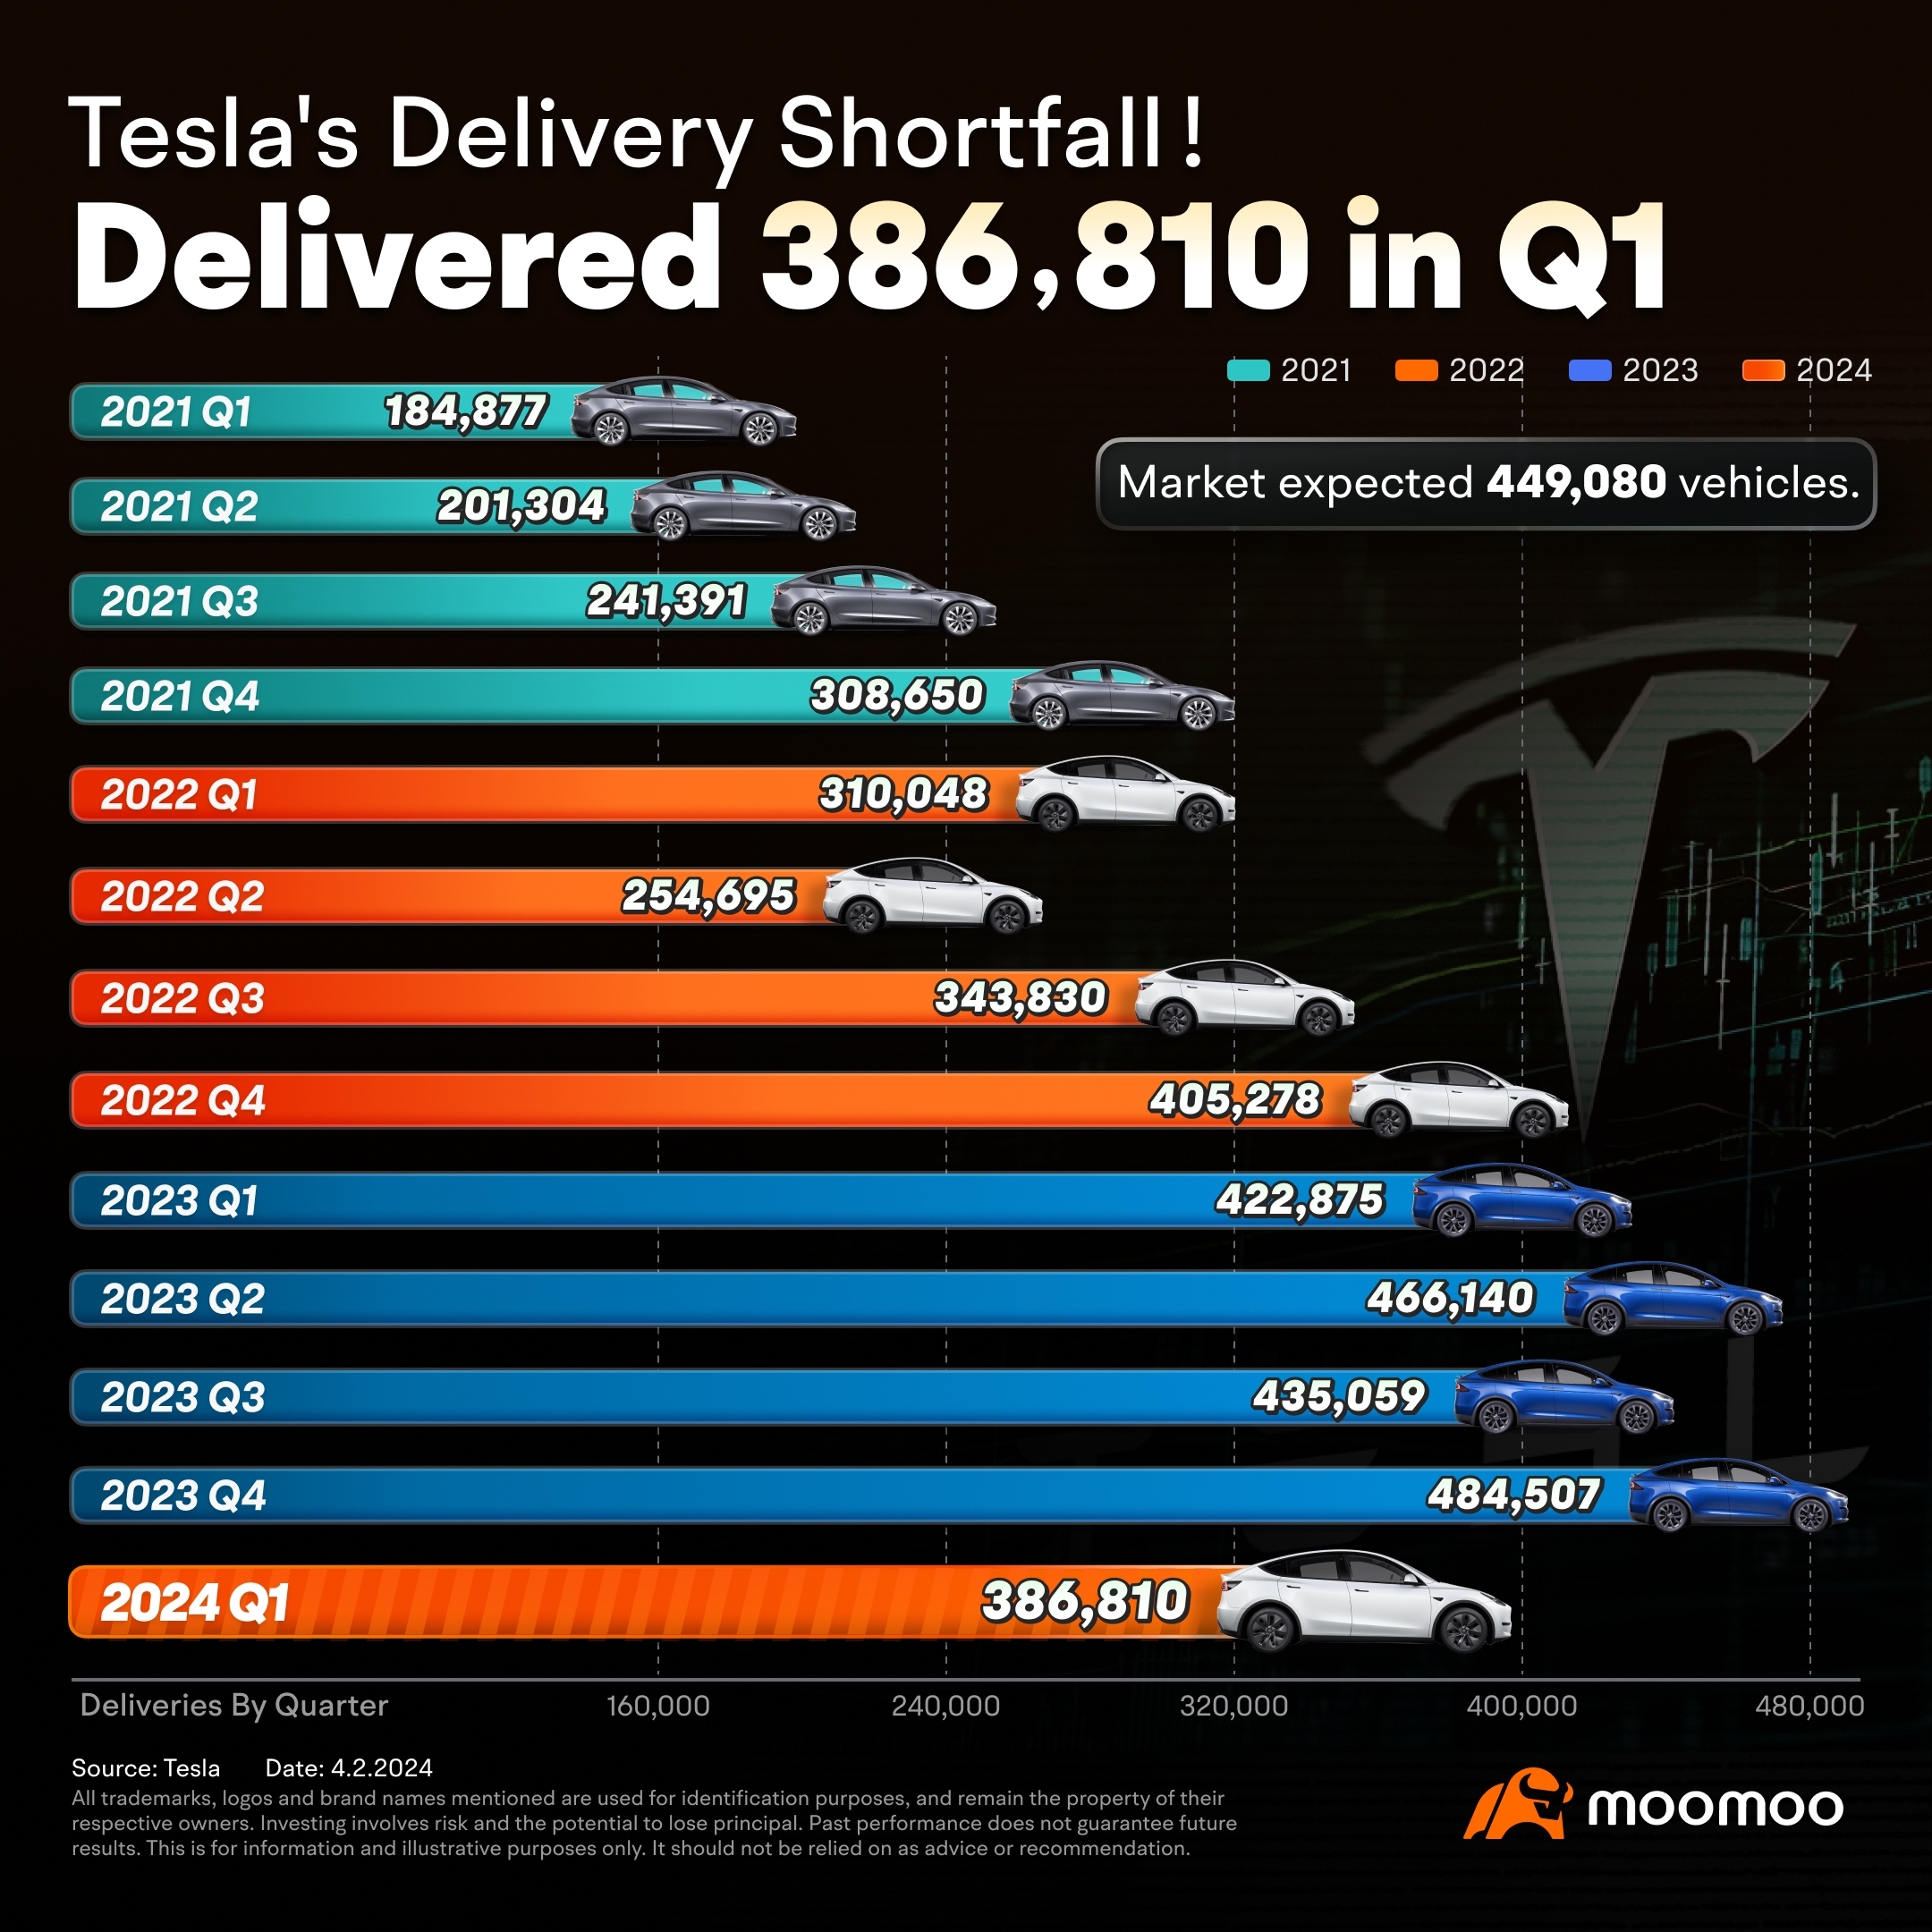 Tracking Tesla: A Historical Overview of Quarterly Vehicle Deliveries